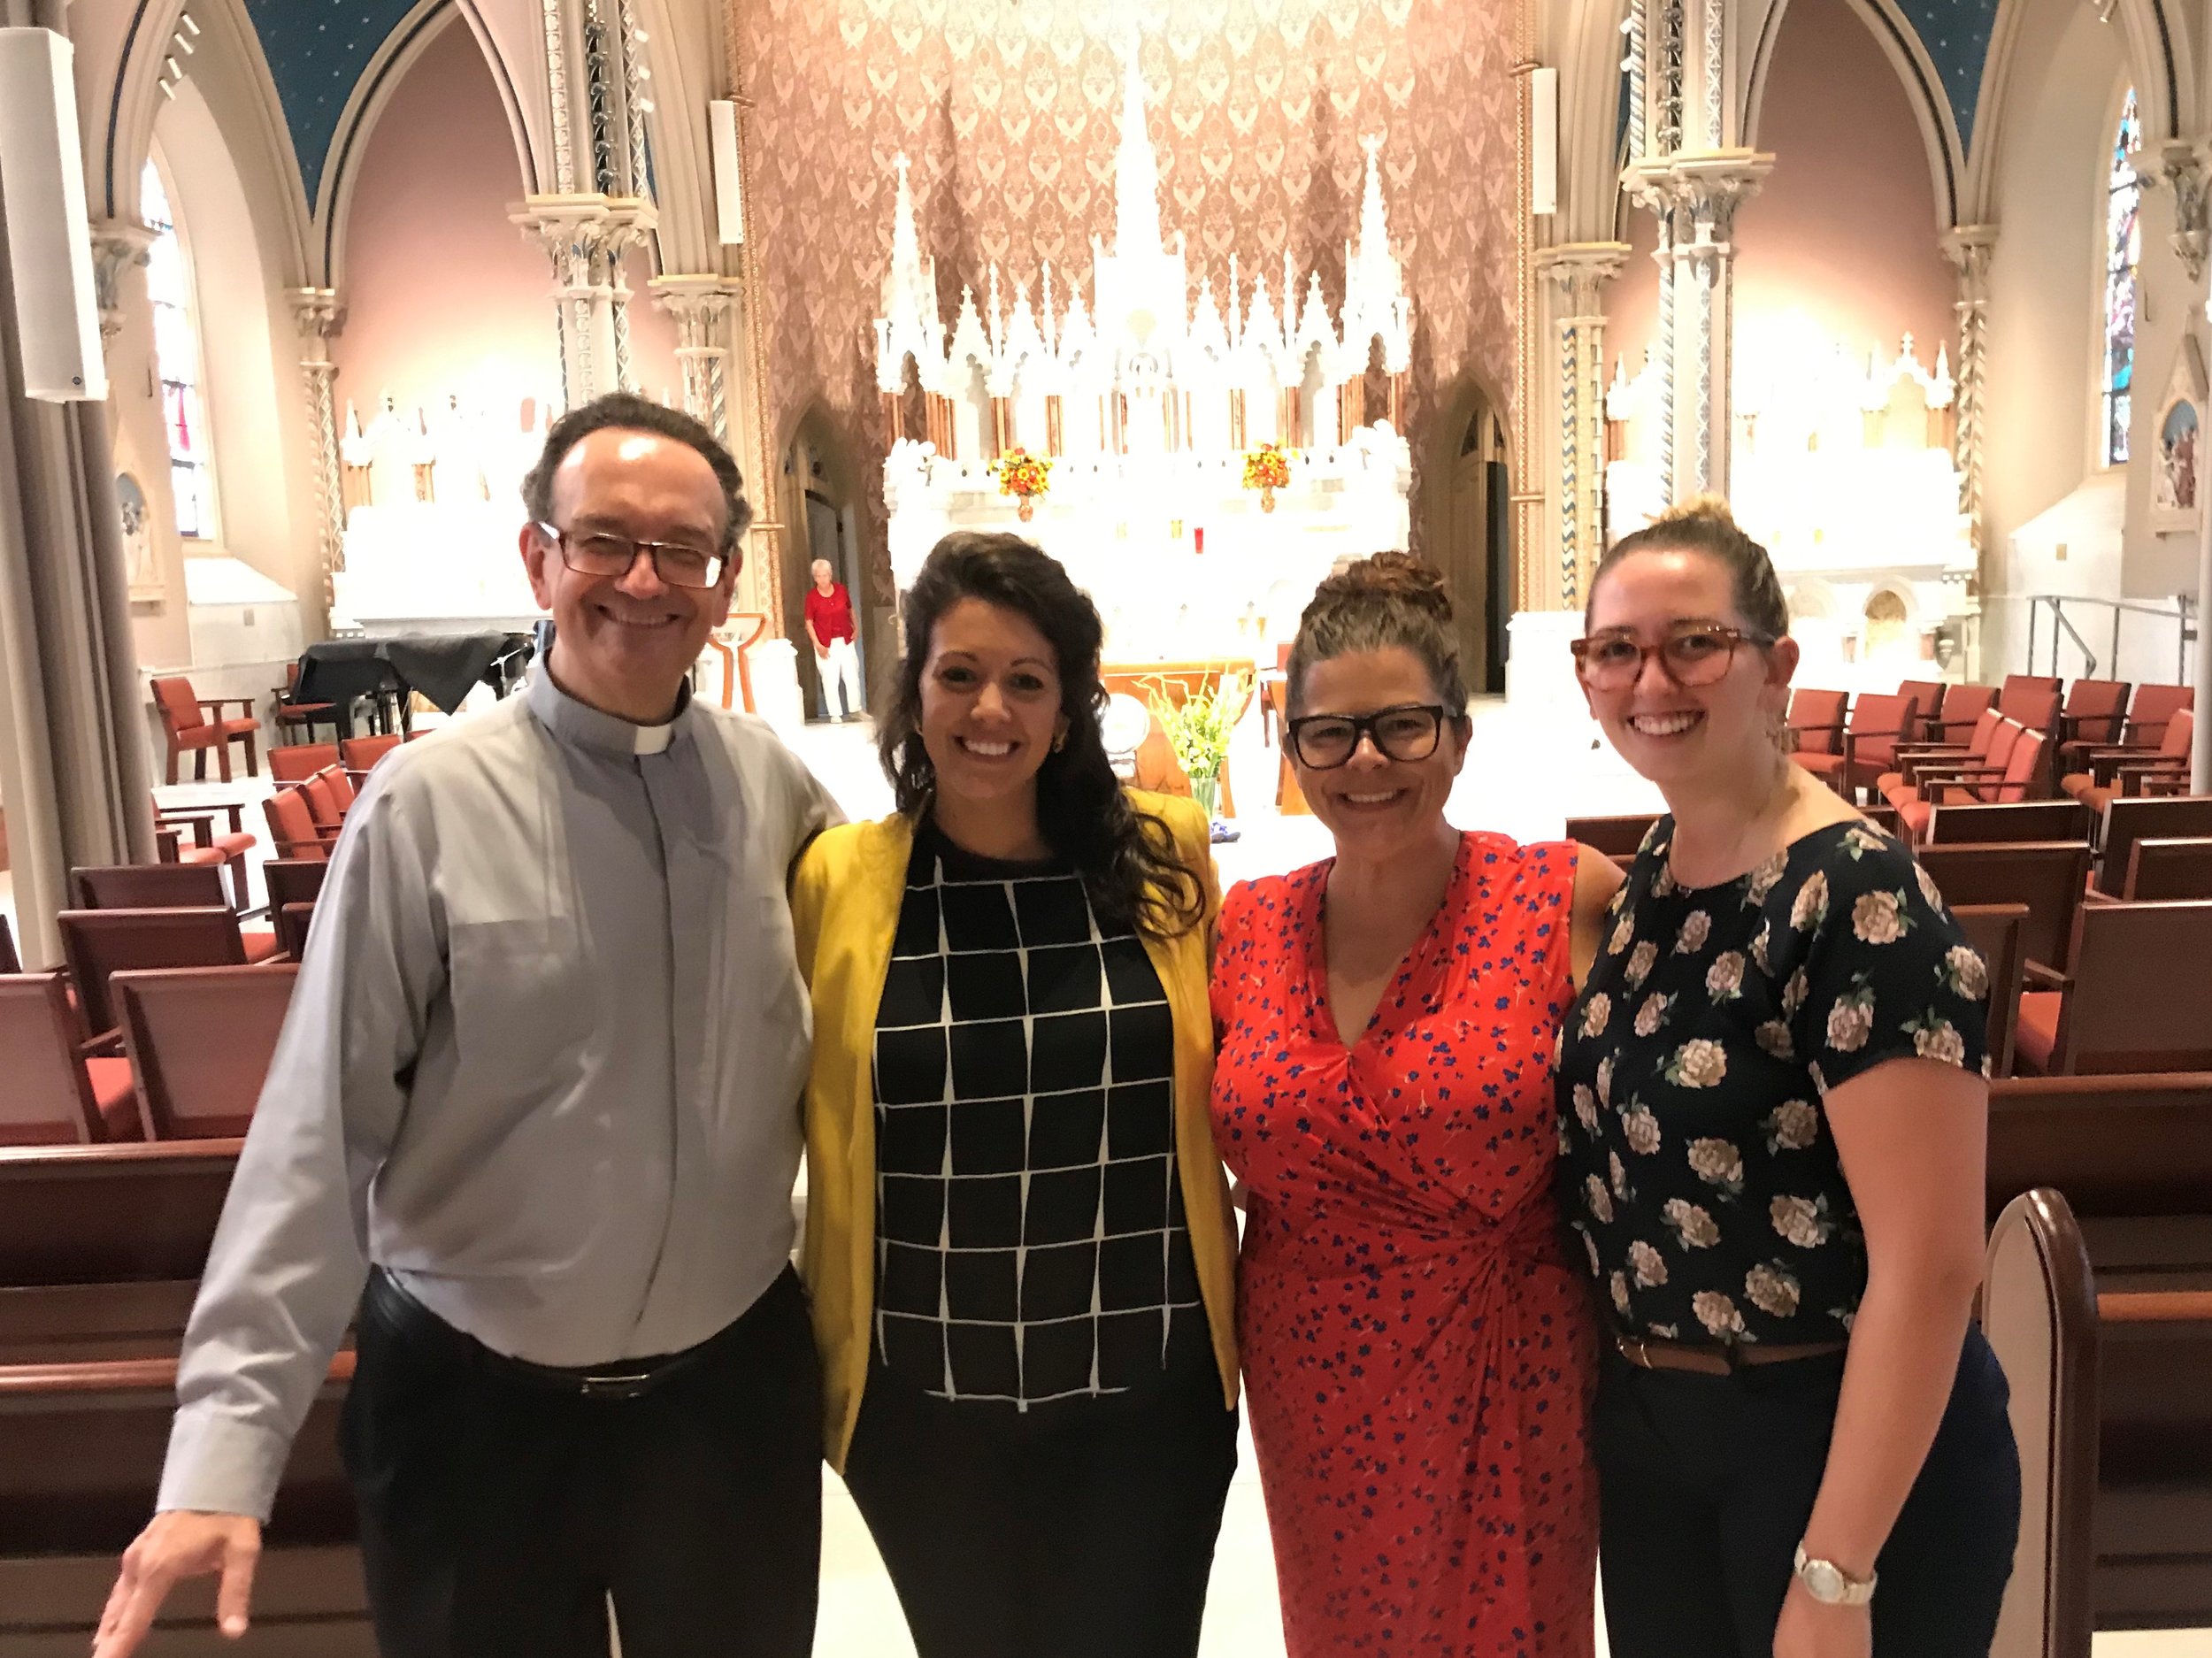  Rev. Robert Mulligan, OSFS, (Left) enjoys his role as chaplain for Chestnut Hill College. He is joined by his campus ministry teammates, Ms. Jaclyn Newns, Director of Campus Ministry, Ms. Cara McMahon, Assistant to the President for Mission and Mini